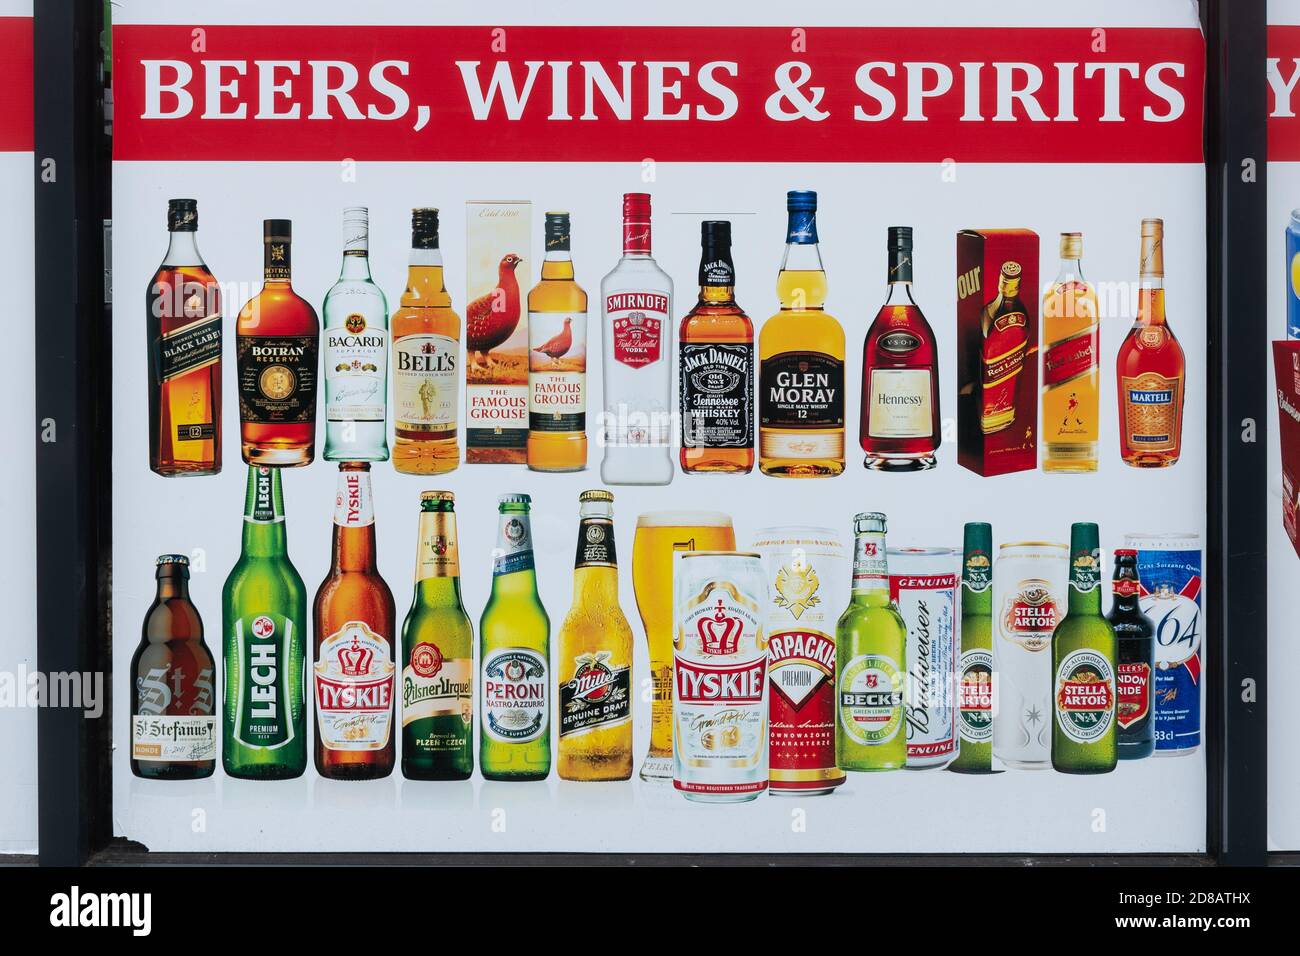 Advertising poster for beers, wines and spirits in the window of a convenience store, UK Stock Photo